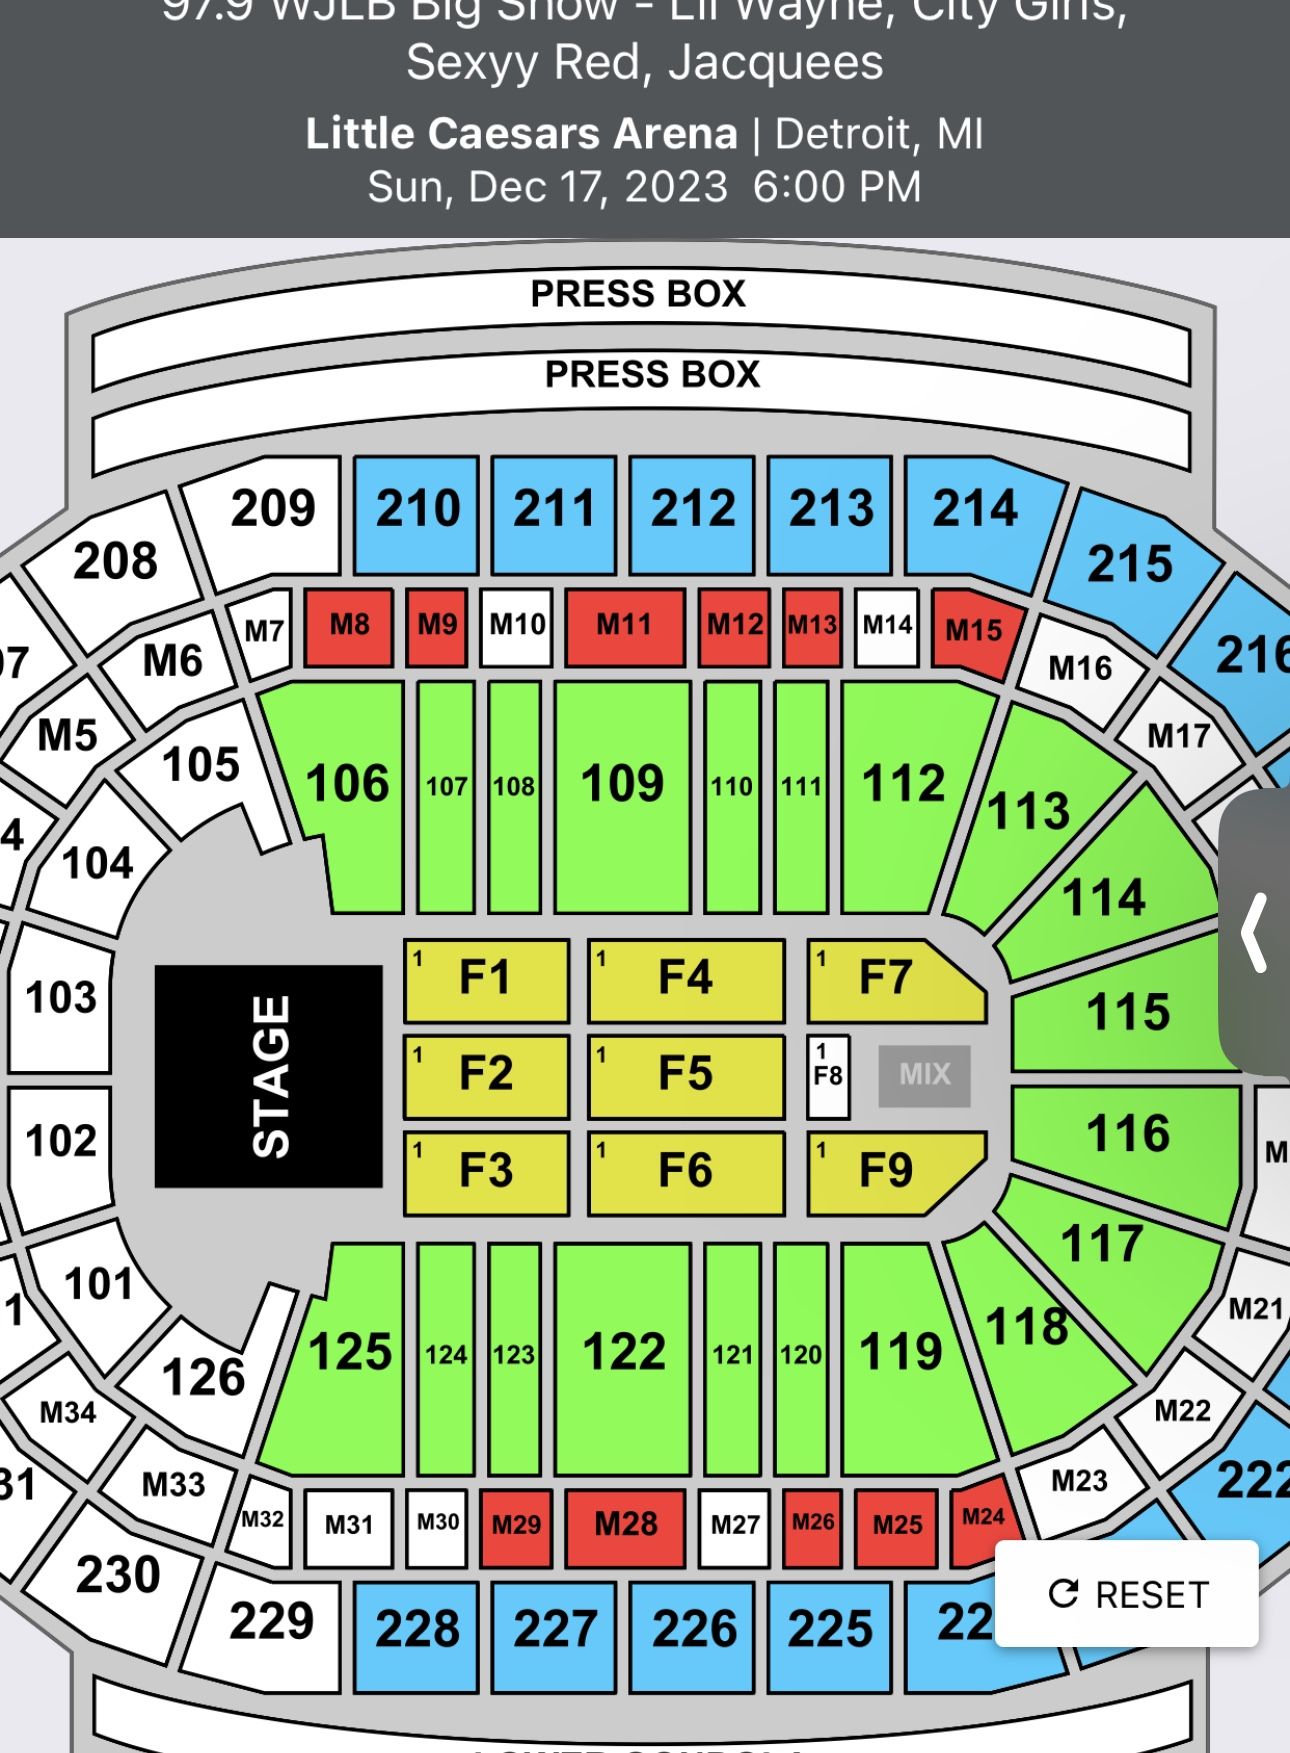 WJLB Big Show Tickets For Sale Club Section 109